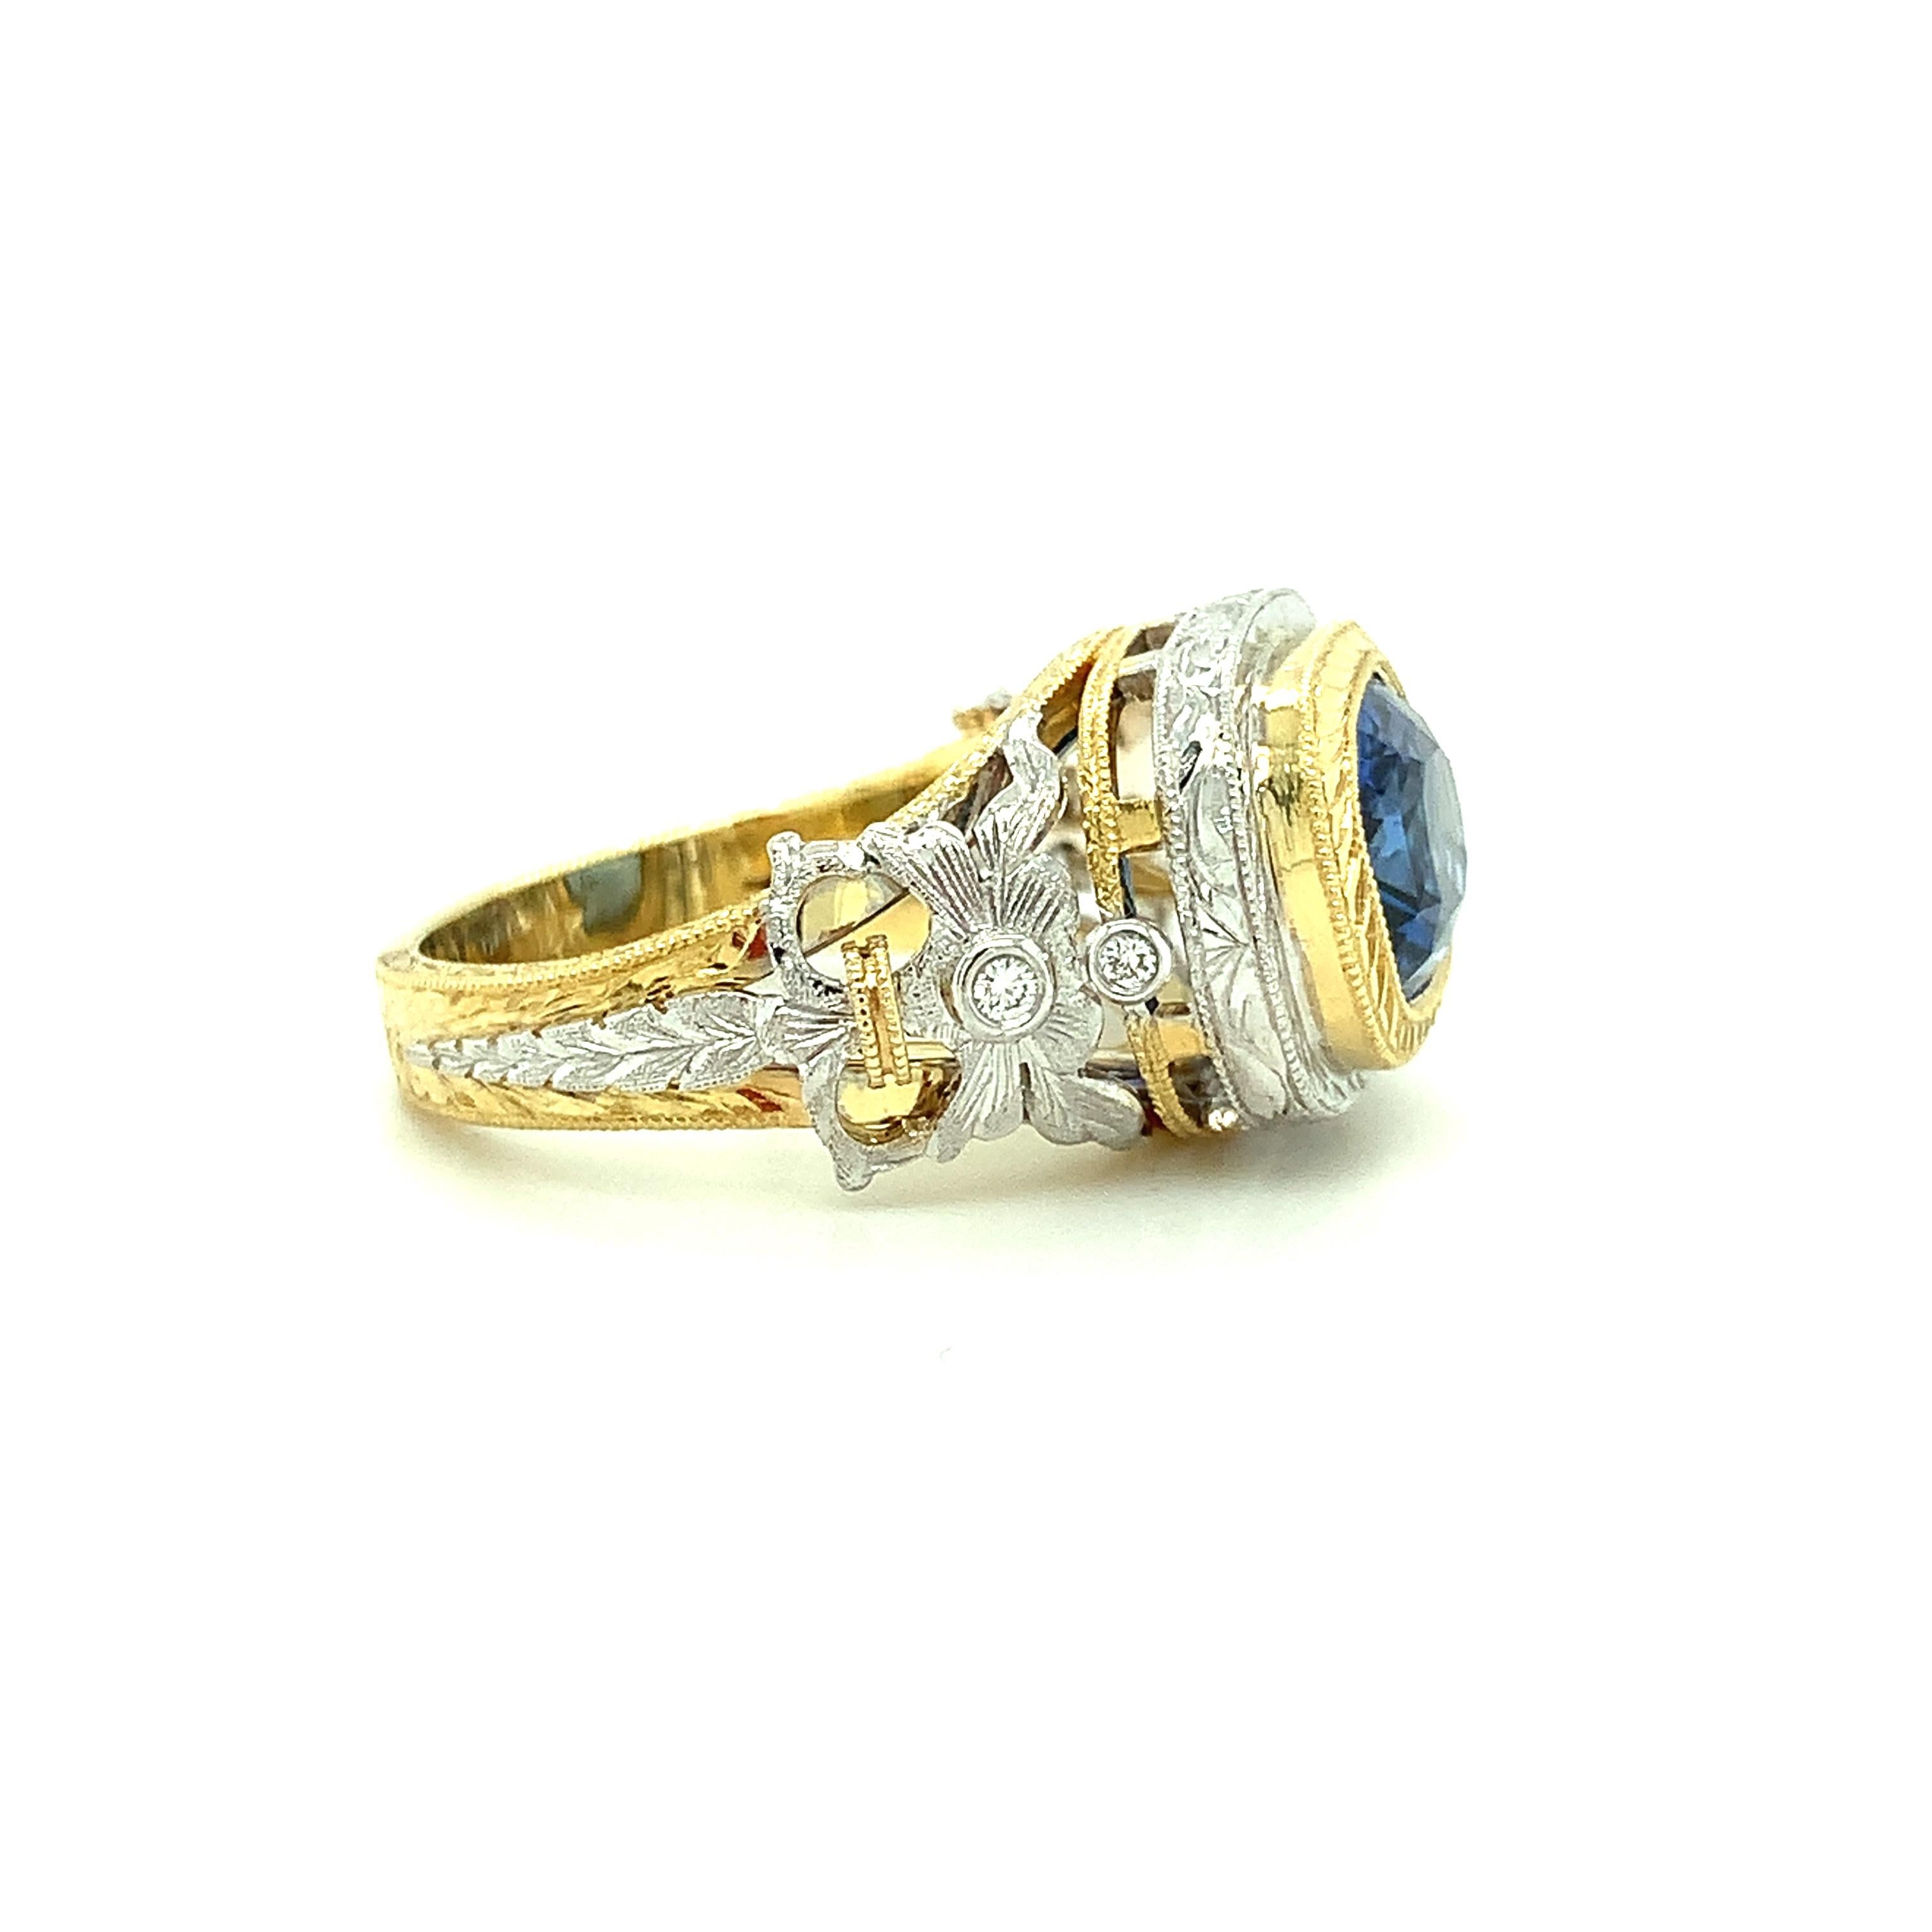 3.80 Carat Blue Sapphire and Diamond Ring, Handmade in 18k Yellow and White Gold For Sale 3